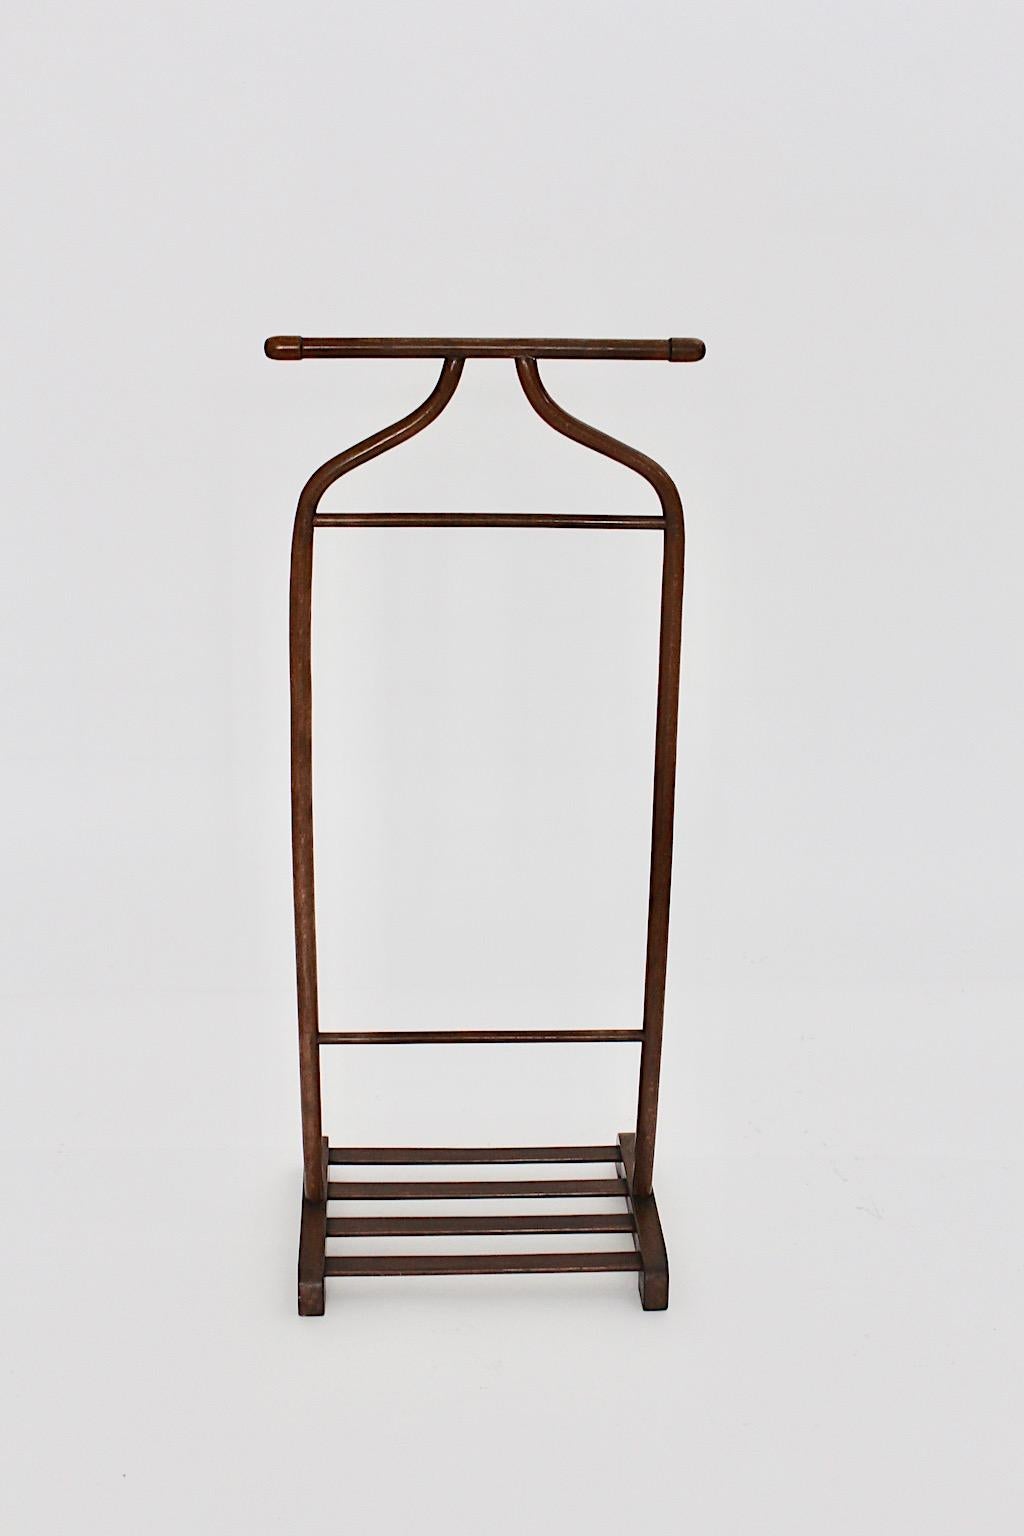 Art Deco vintage valet or coat rack from brown stained beech designed and made by Gebr. Thonet, Vienna, 1920s.
Throughout its warm wooden tone and its practical form the valet would be beautiful for anyone, who is looking for a classical addition